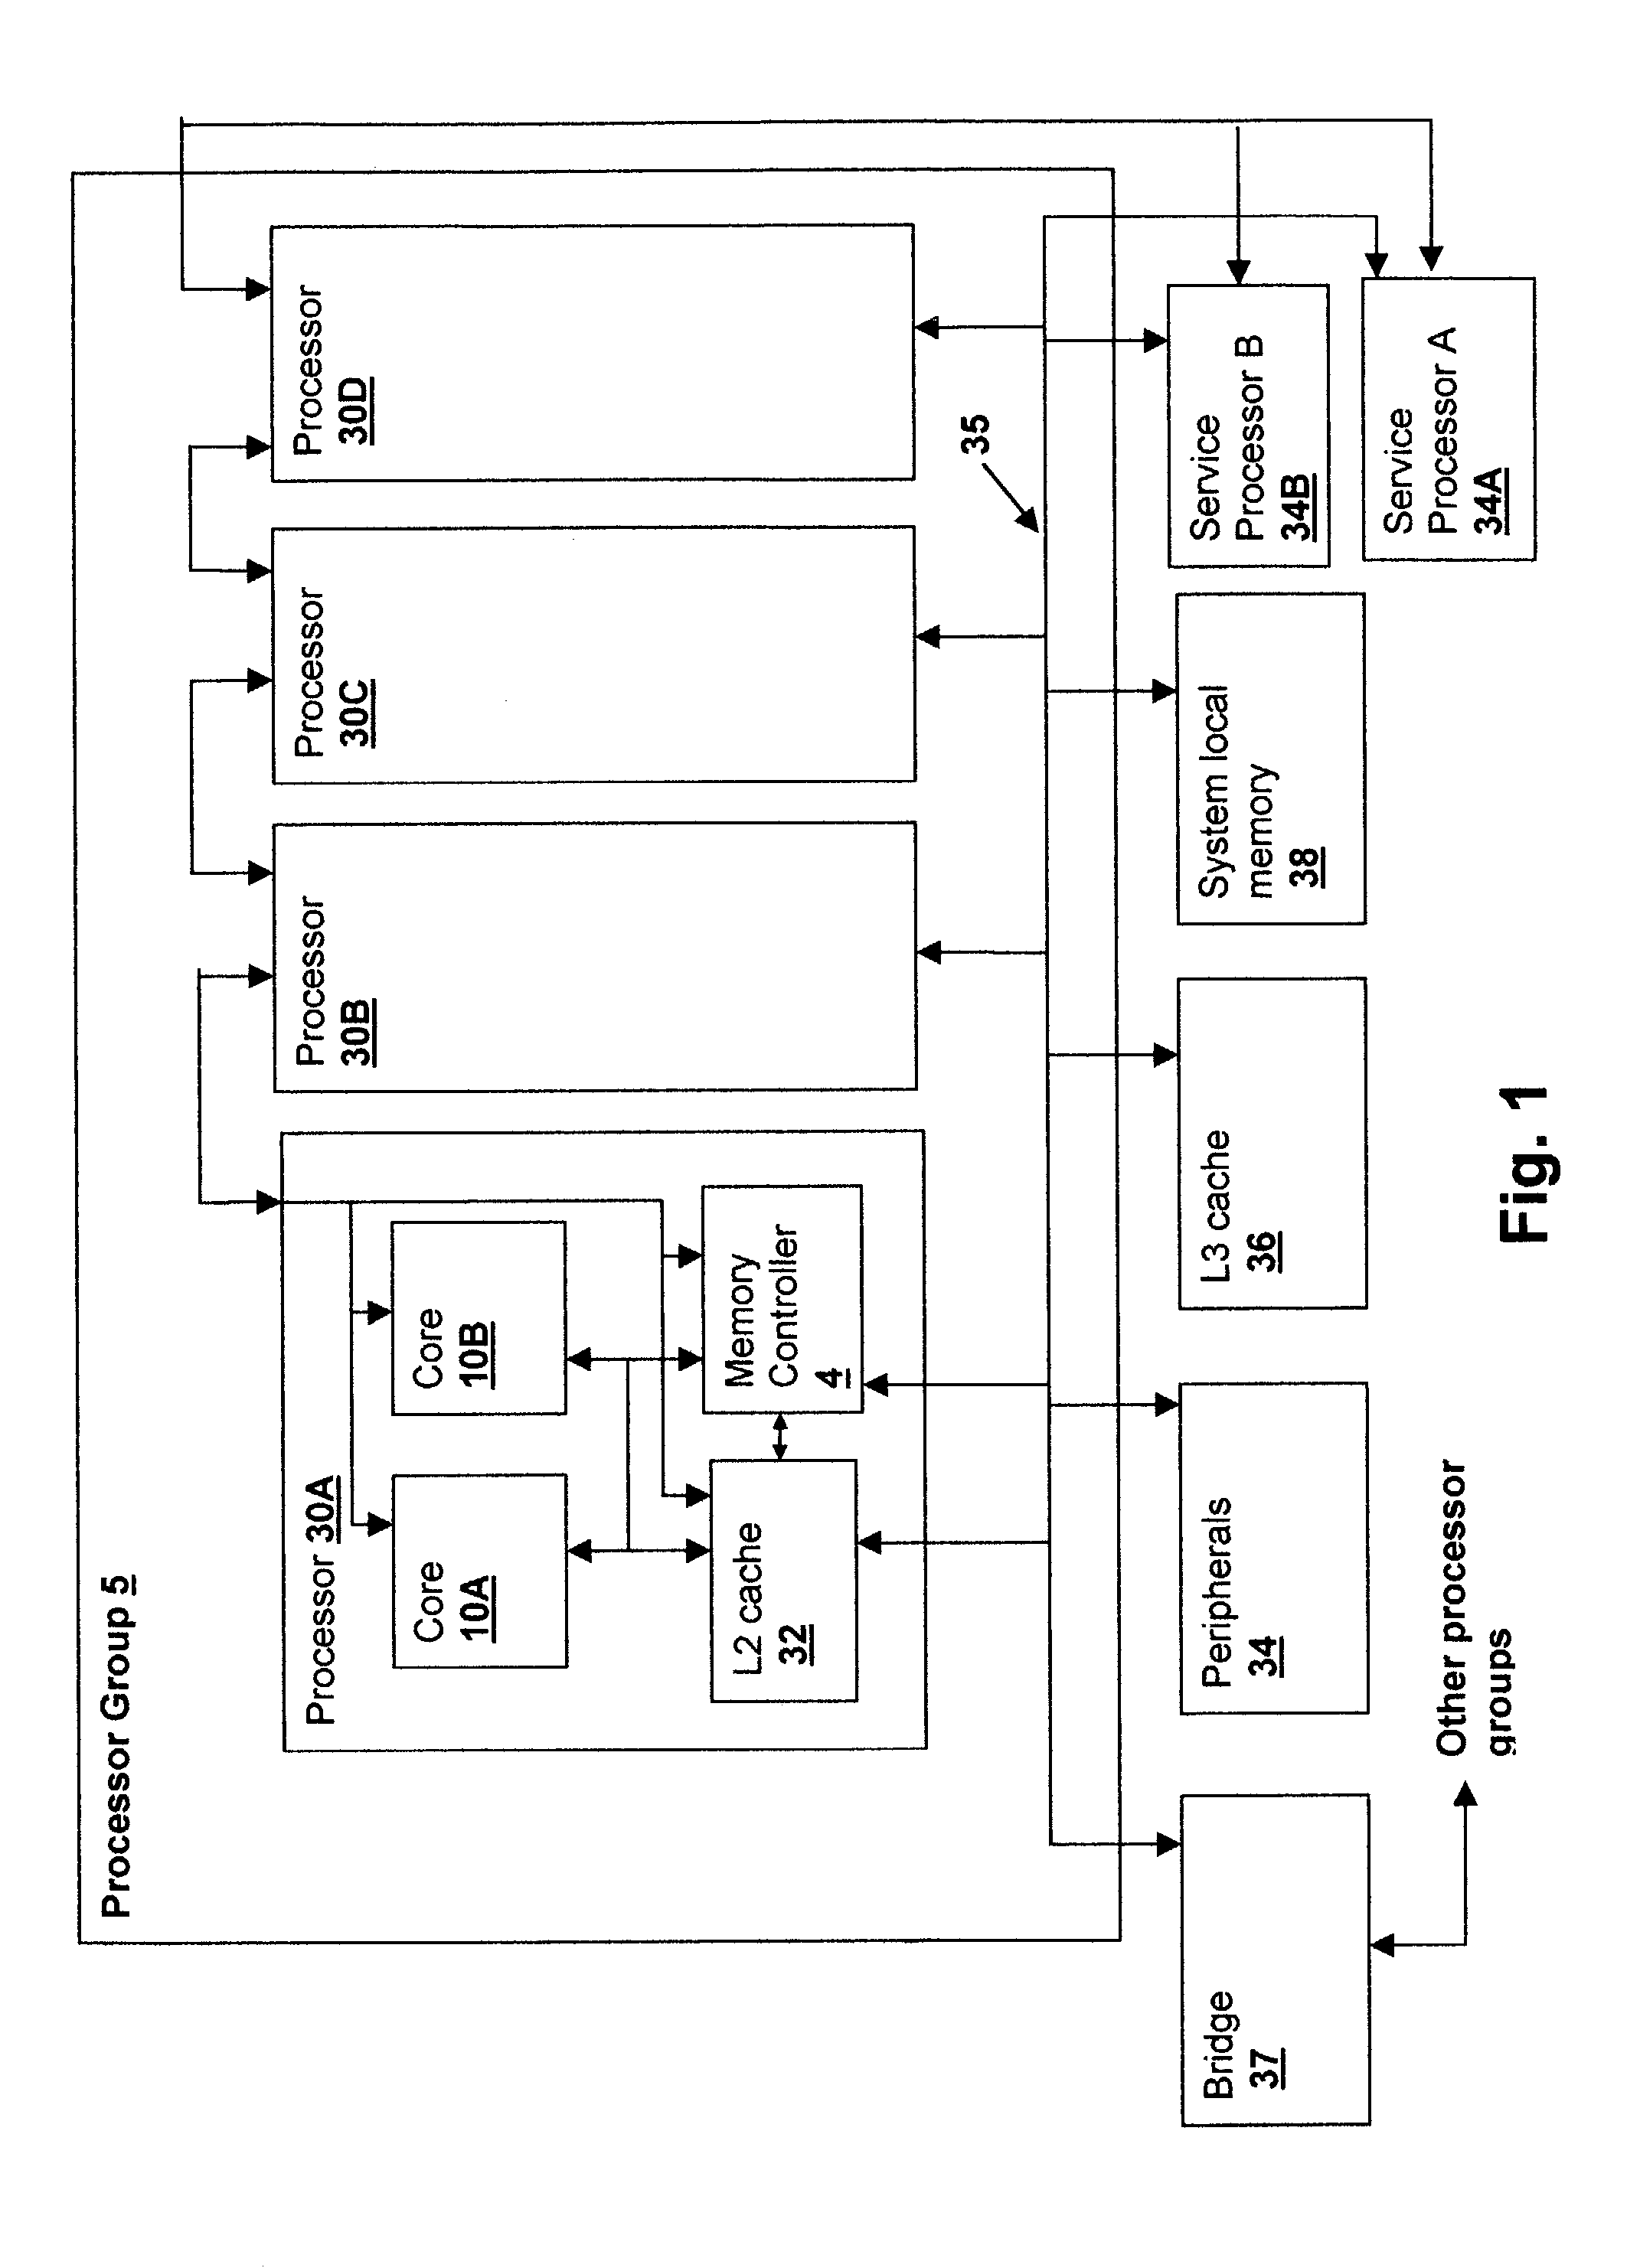 Method and logical apparatus for rename register reallocation in a simultaneous multi-threaded (SMT) processor